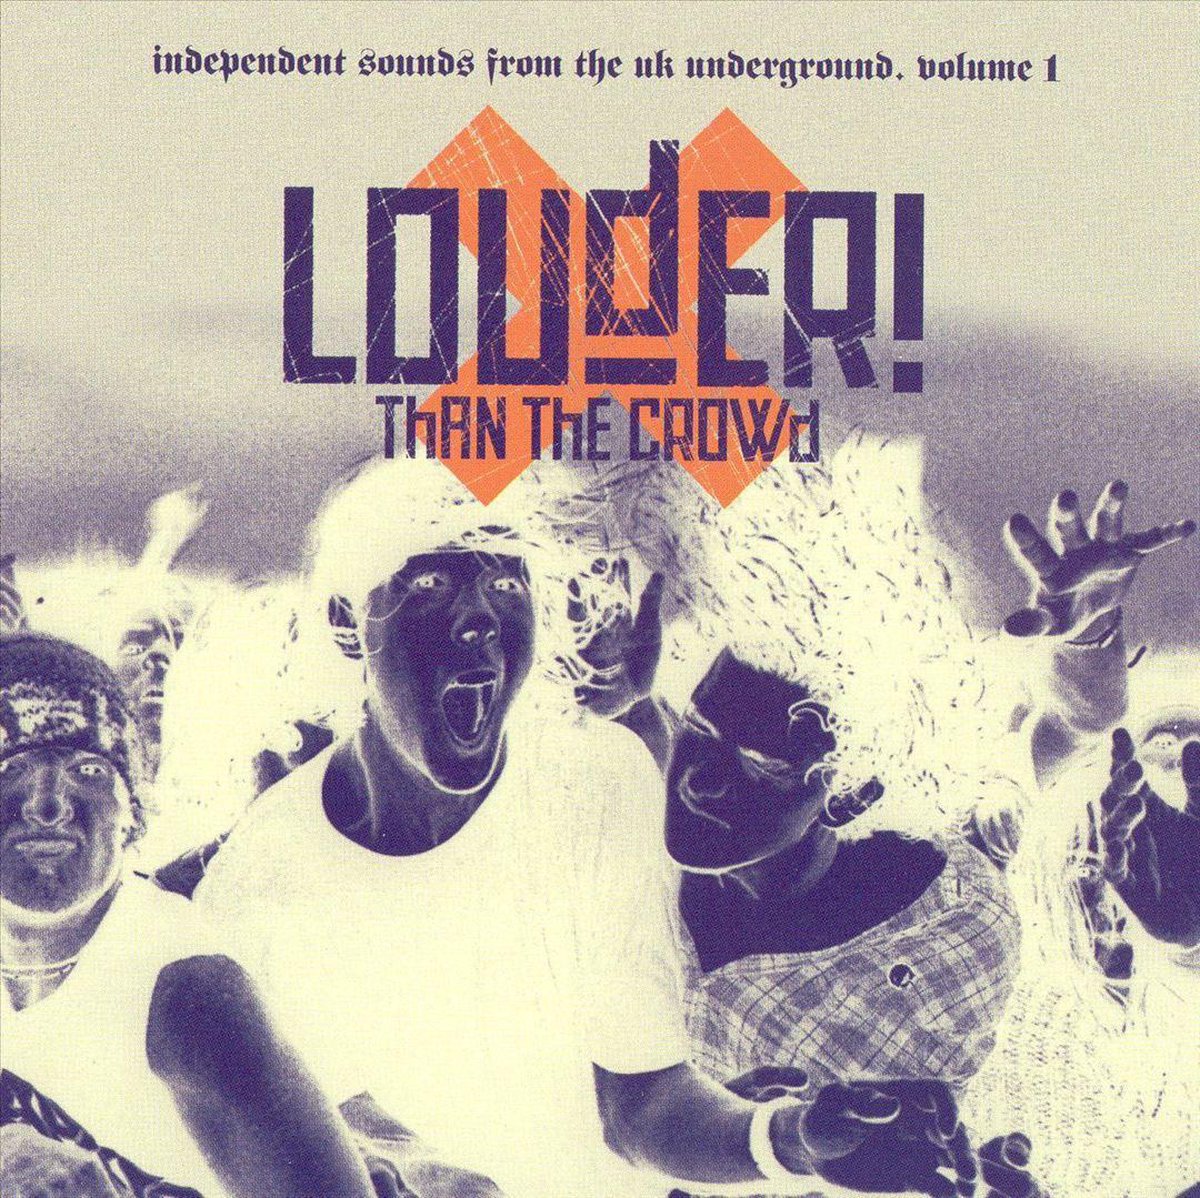 Louder Than the Crowd - various artists